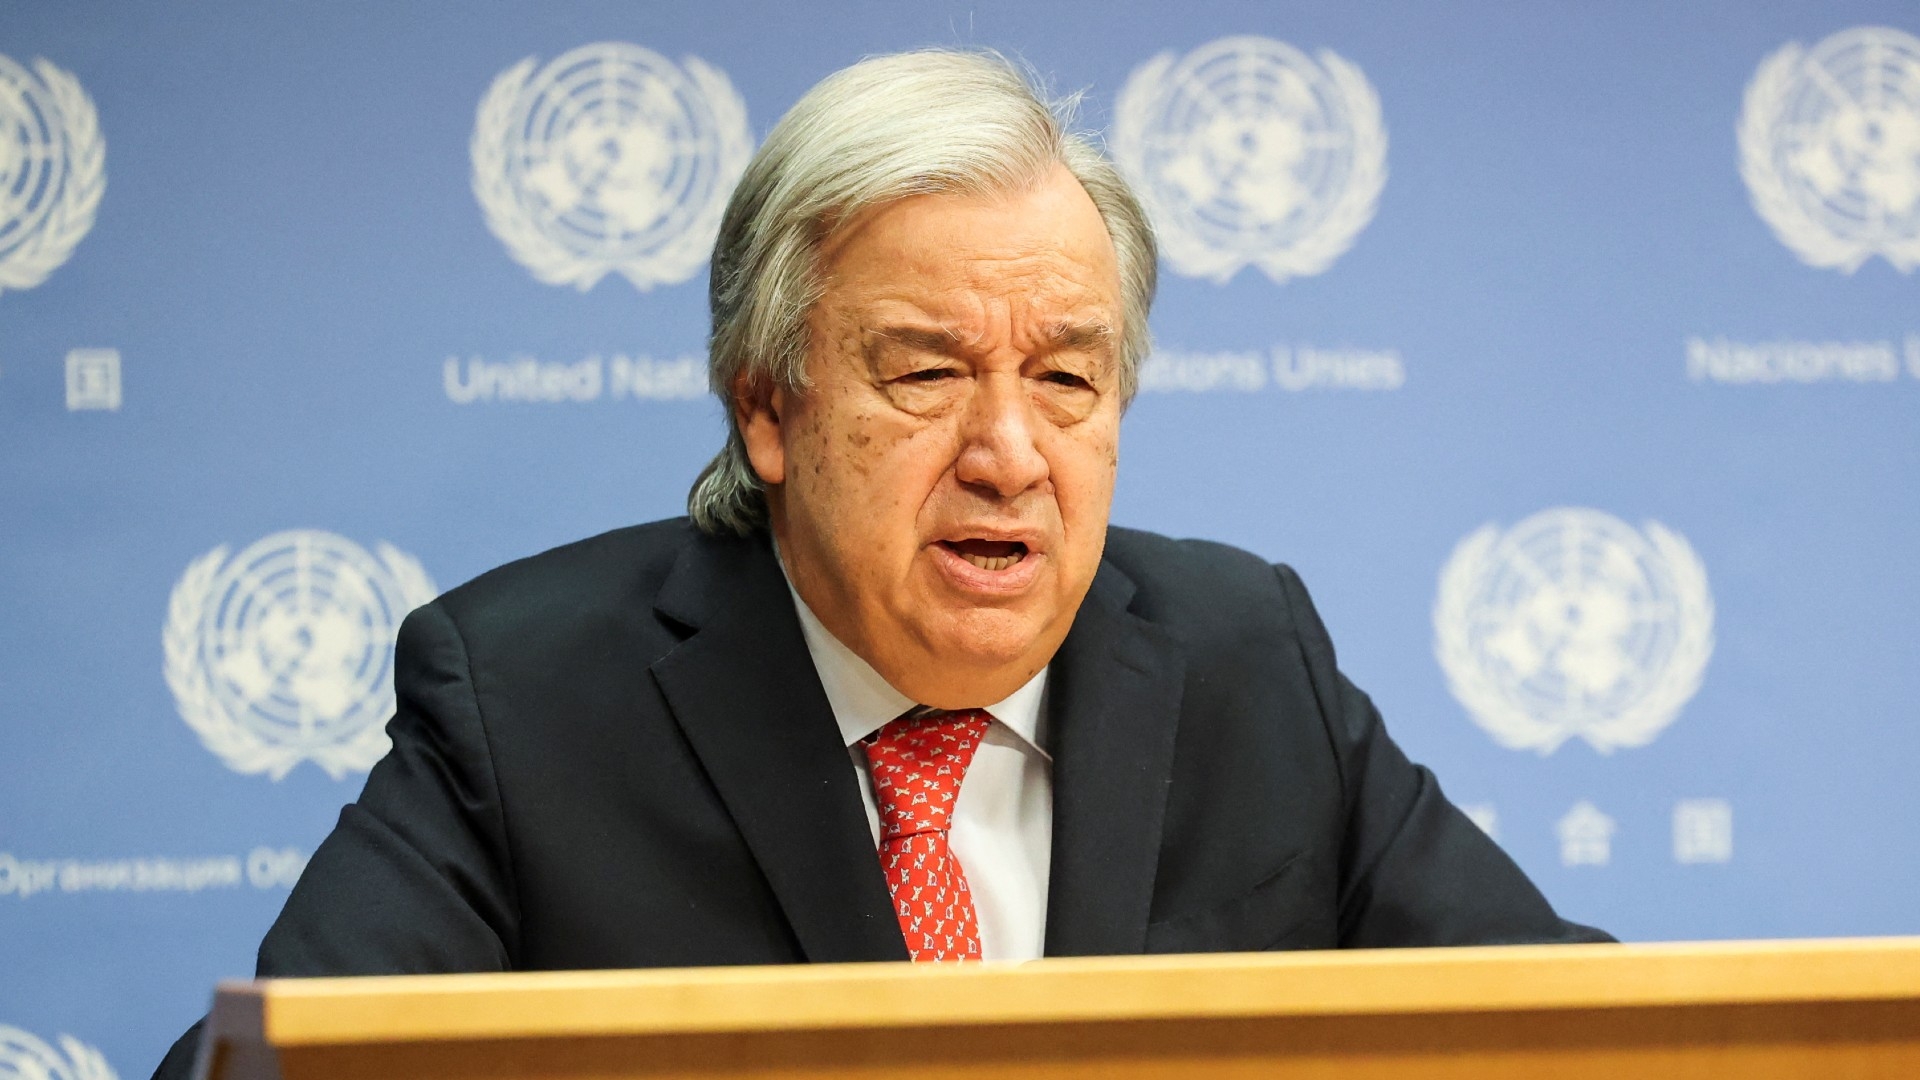 Secretary-General Antonio Guterres speaks at the United Nations Headquarters in New York City on 6 November (Reuters)